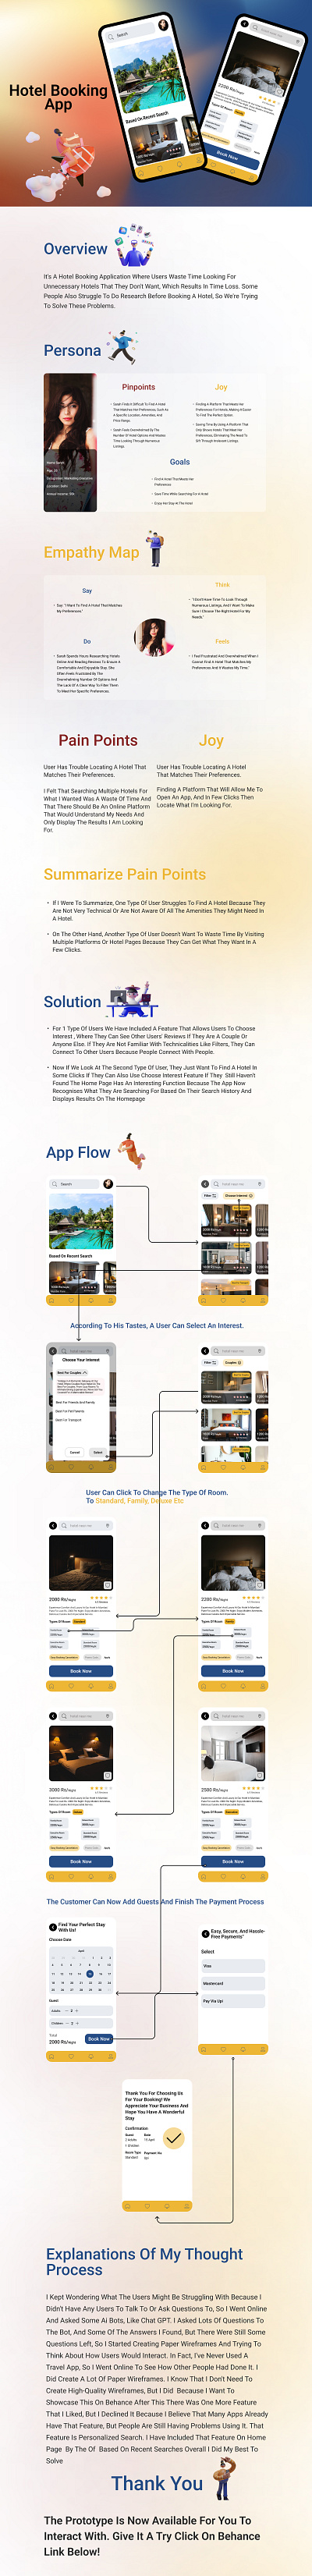 hotel booking mobile app case study graphic design hotel hotel booking logo mobile app motion graphics ui